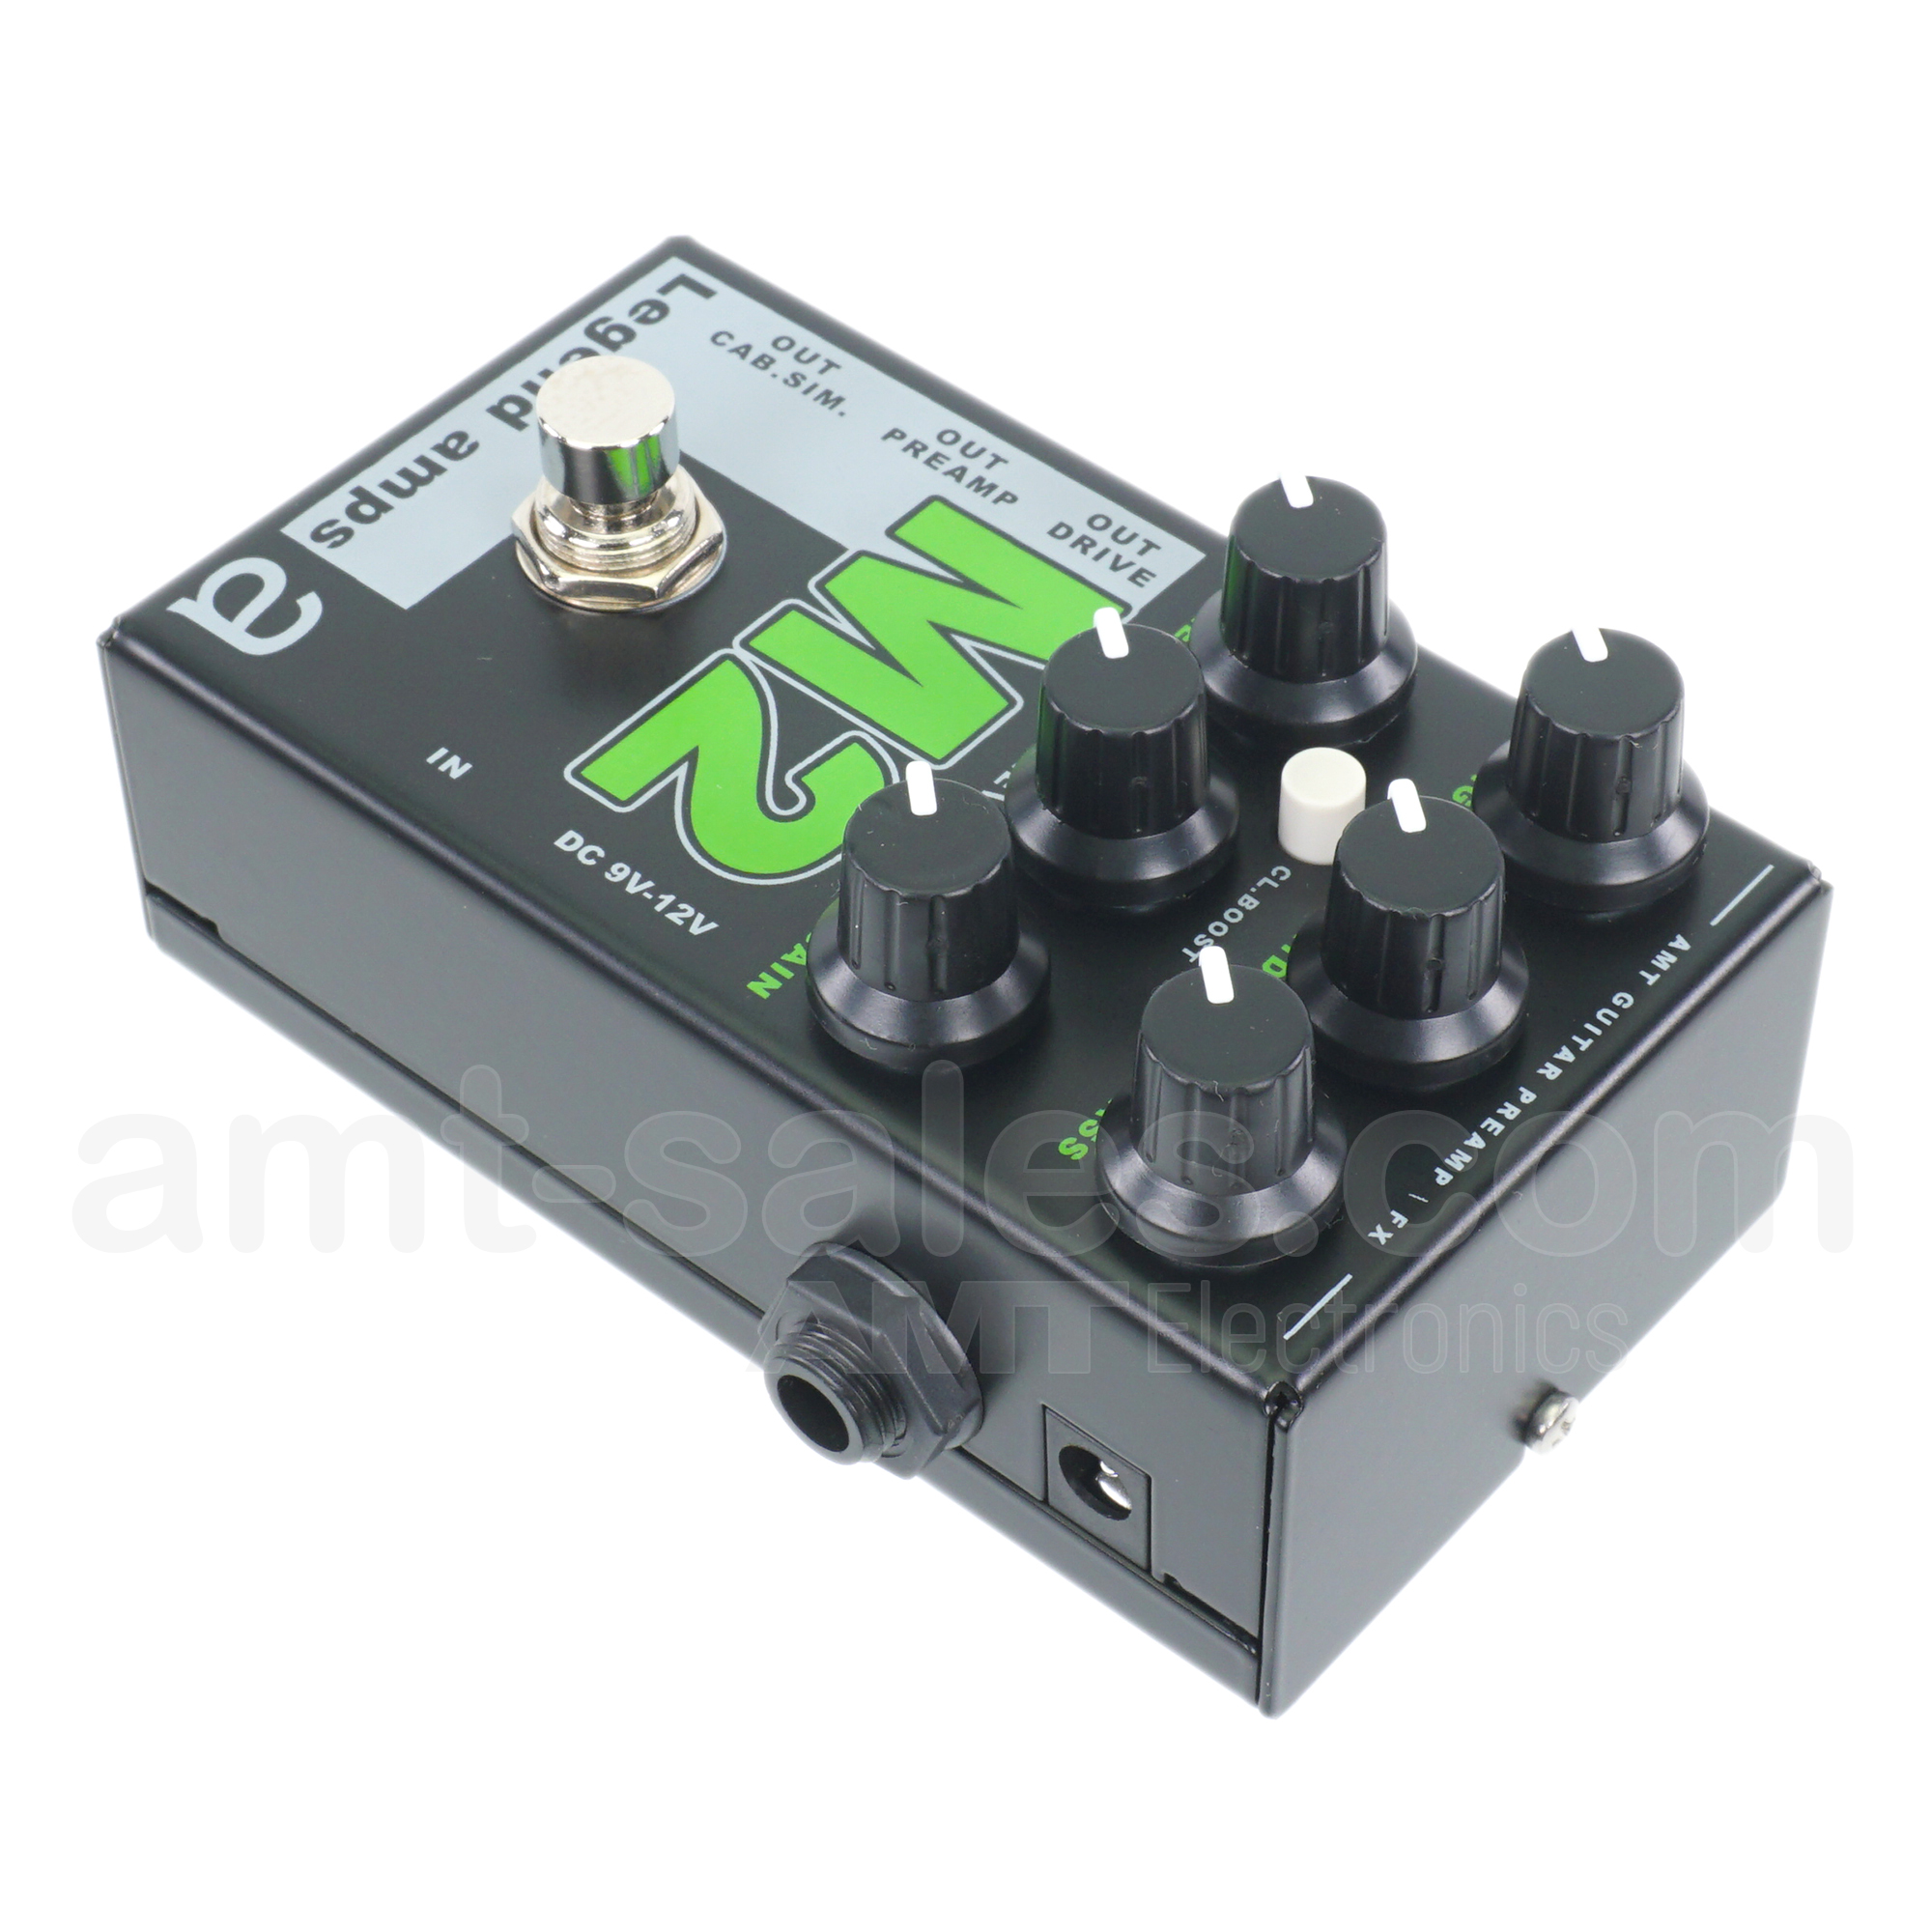 AMT M2 - 2 channels guitar preamp/distortion pedal (Marshall)